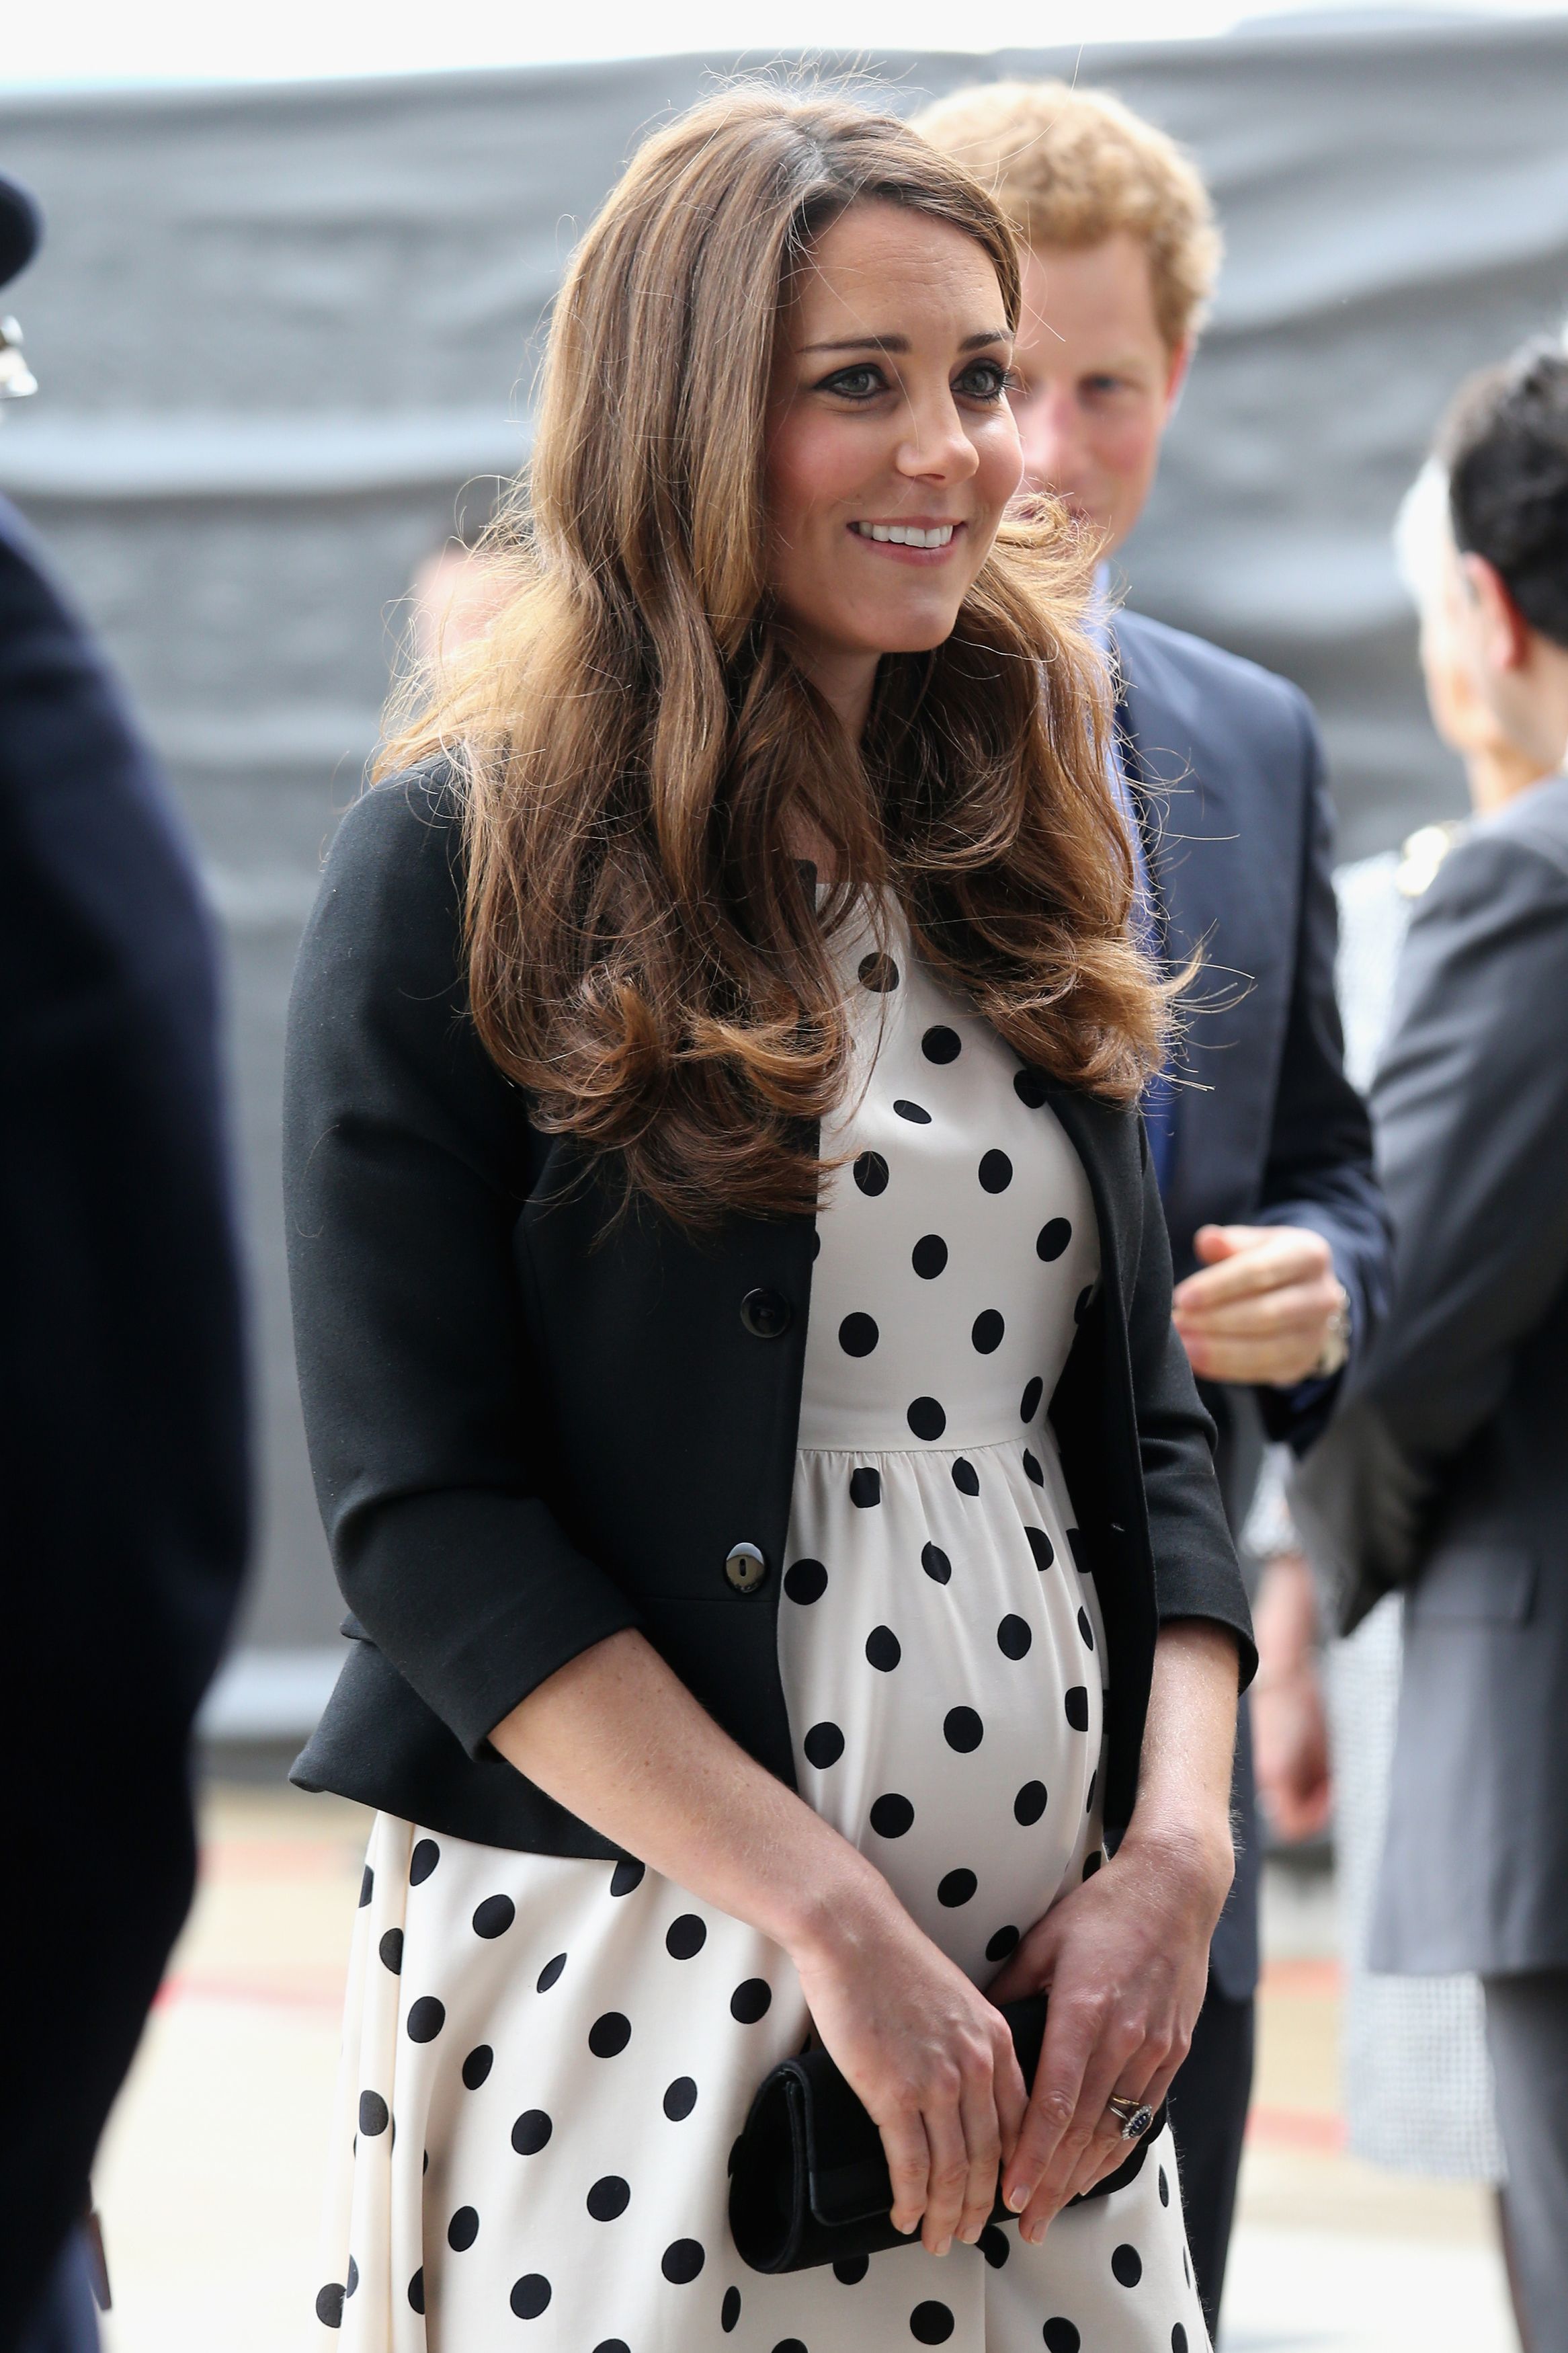 Duchess of Cambridge arrives for her visit to Warner Bros studios in Leavesden, Herts where the popular Harry Potter movies were produced on April 26, 2013.